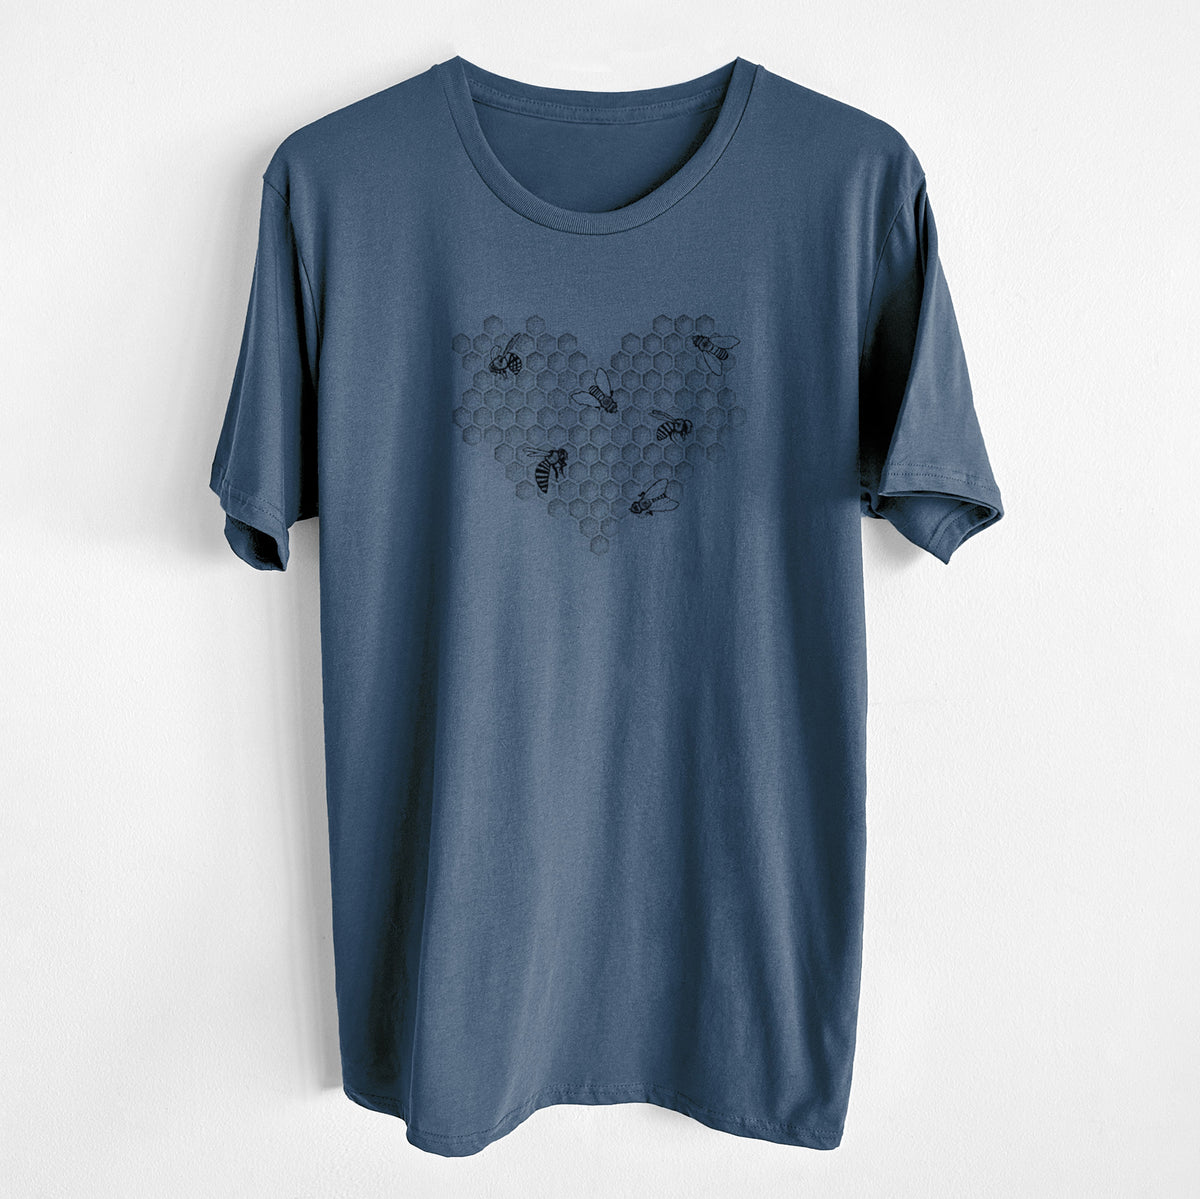 Honeycomb Heart with Bees - Unisex Crewneck - Made in USA - 100% Organic Cotton